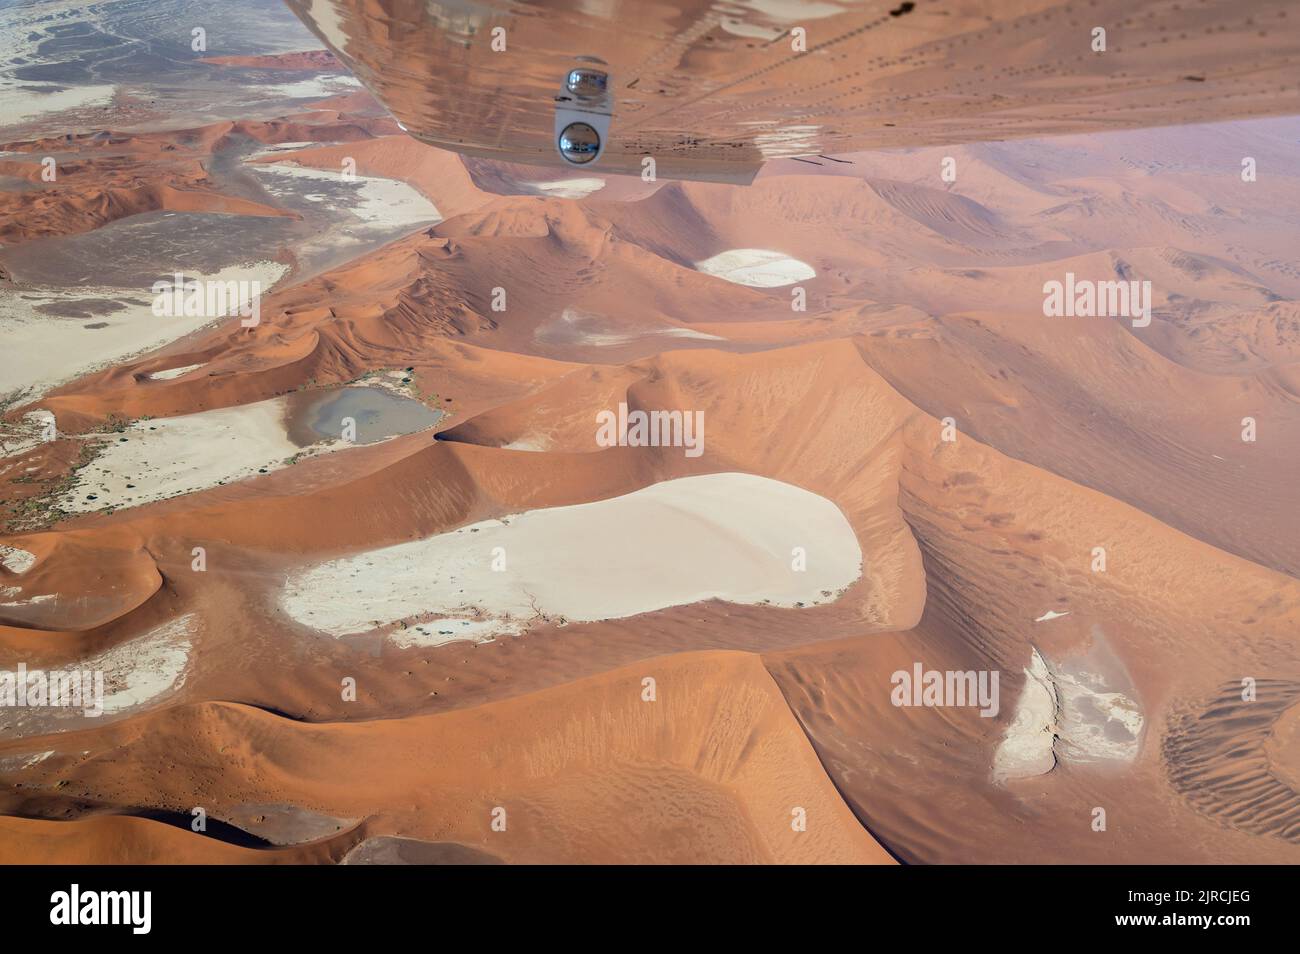 Aerial view from an airplane of Deadvlei in the desert of Namibia Africa Stock Photo